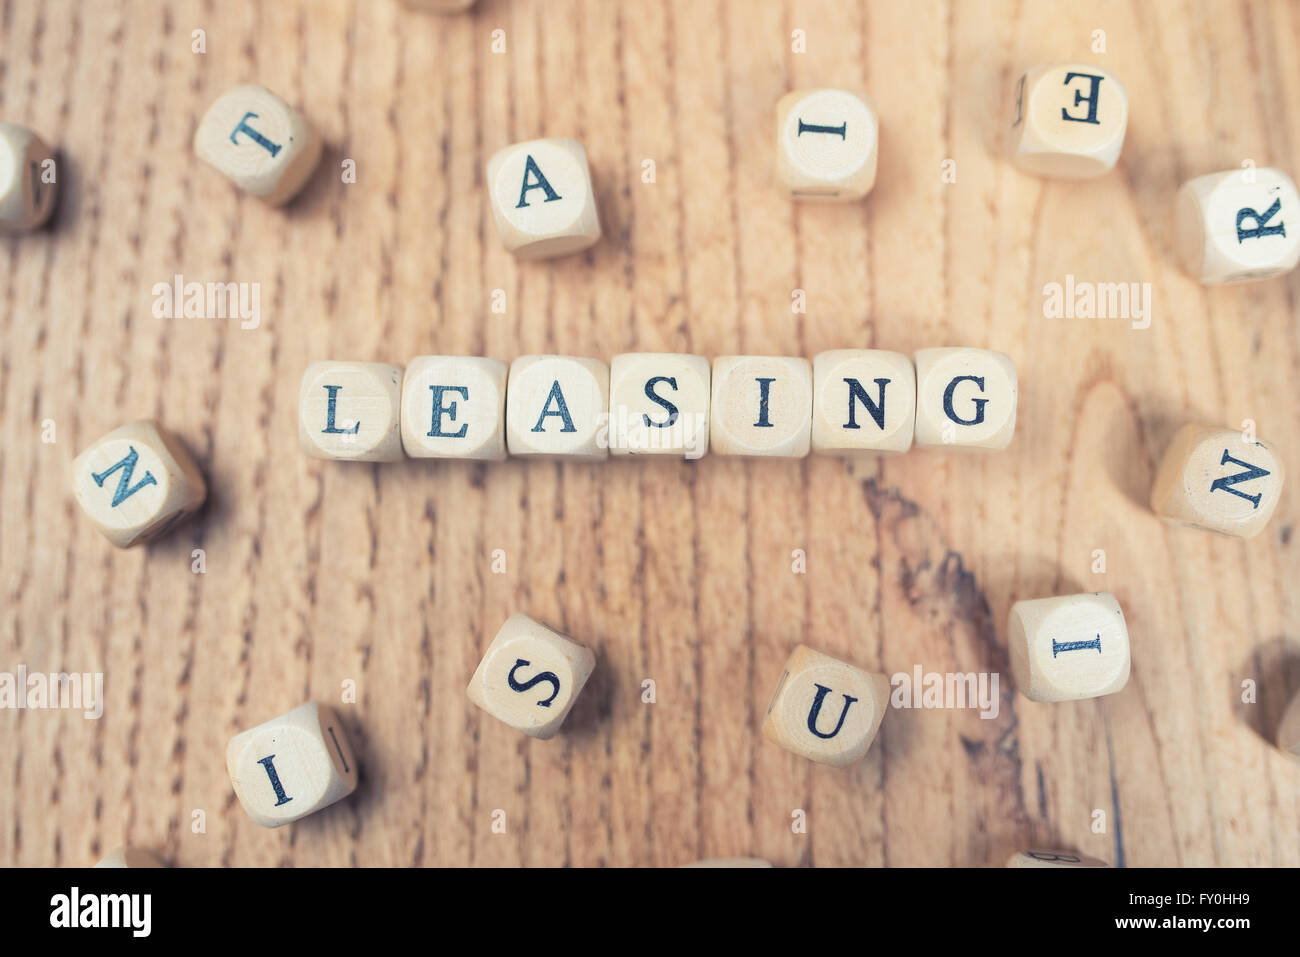 Leasing concept with letters Stock Photo